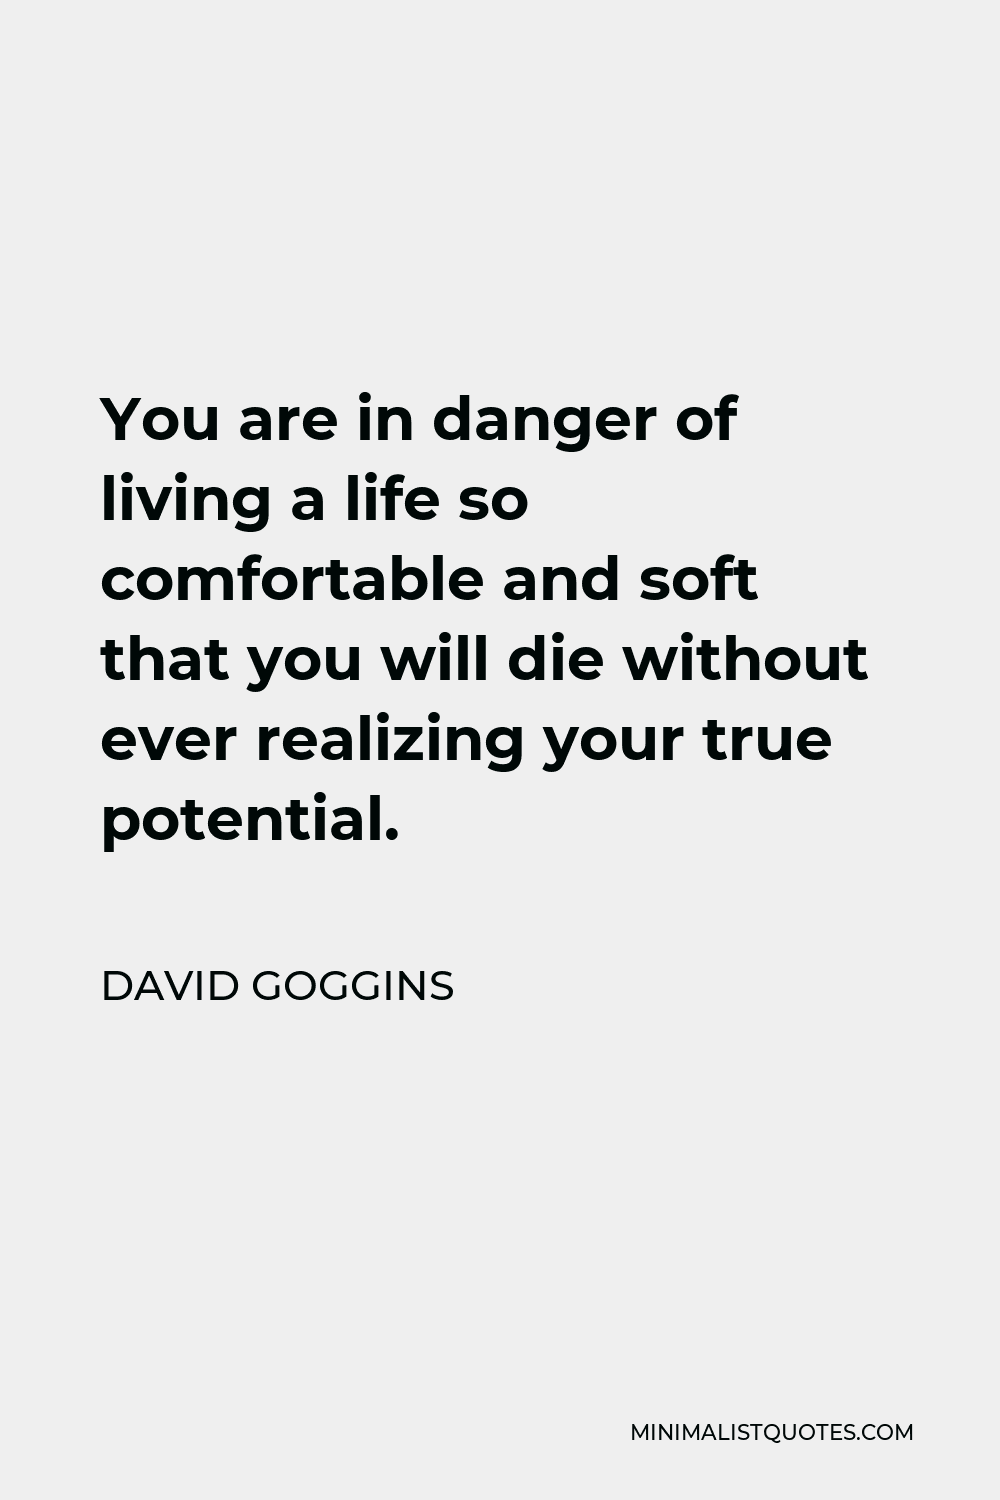 David Goggins Quote: You are in danger of living a life so comfortable and  soft that you will die without ever realizing your true potential.